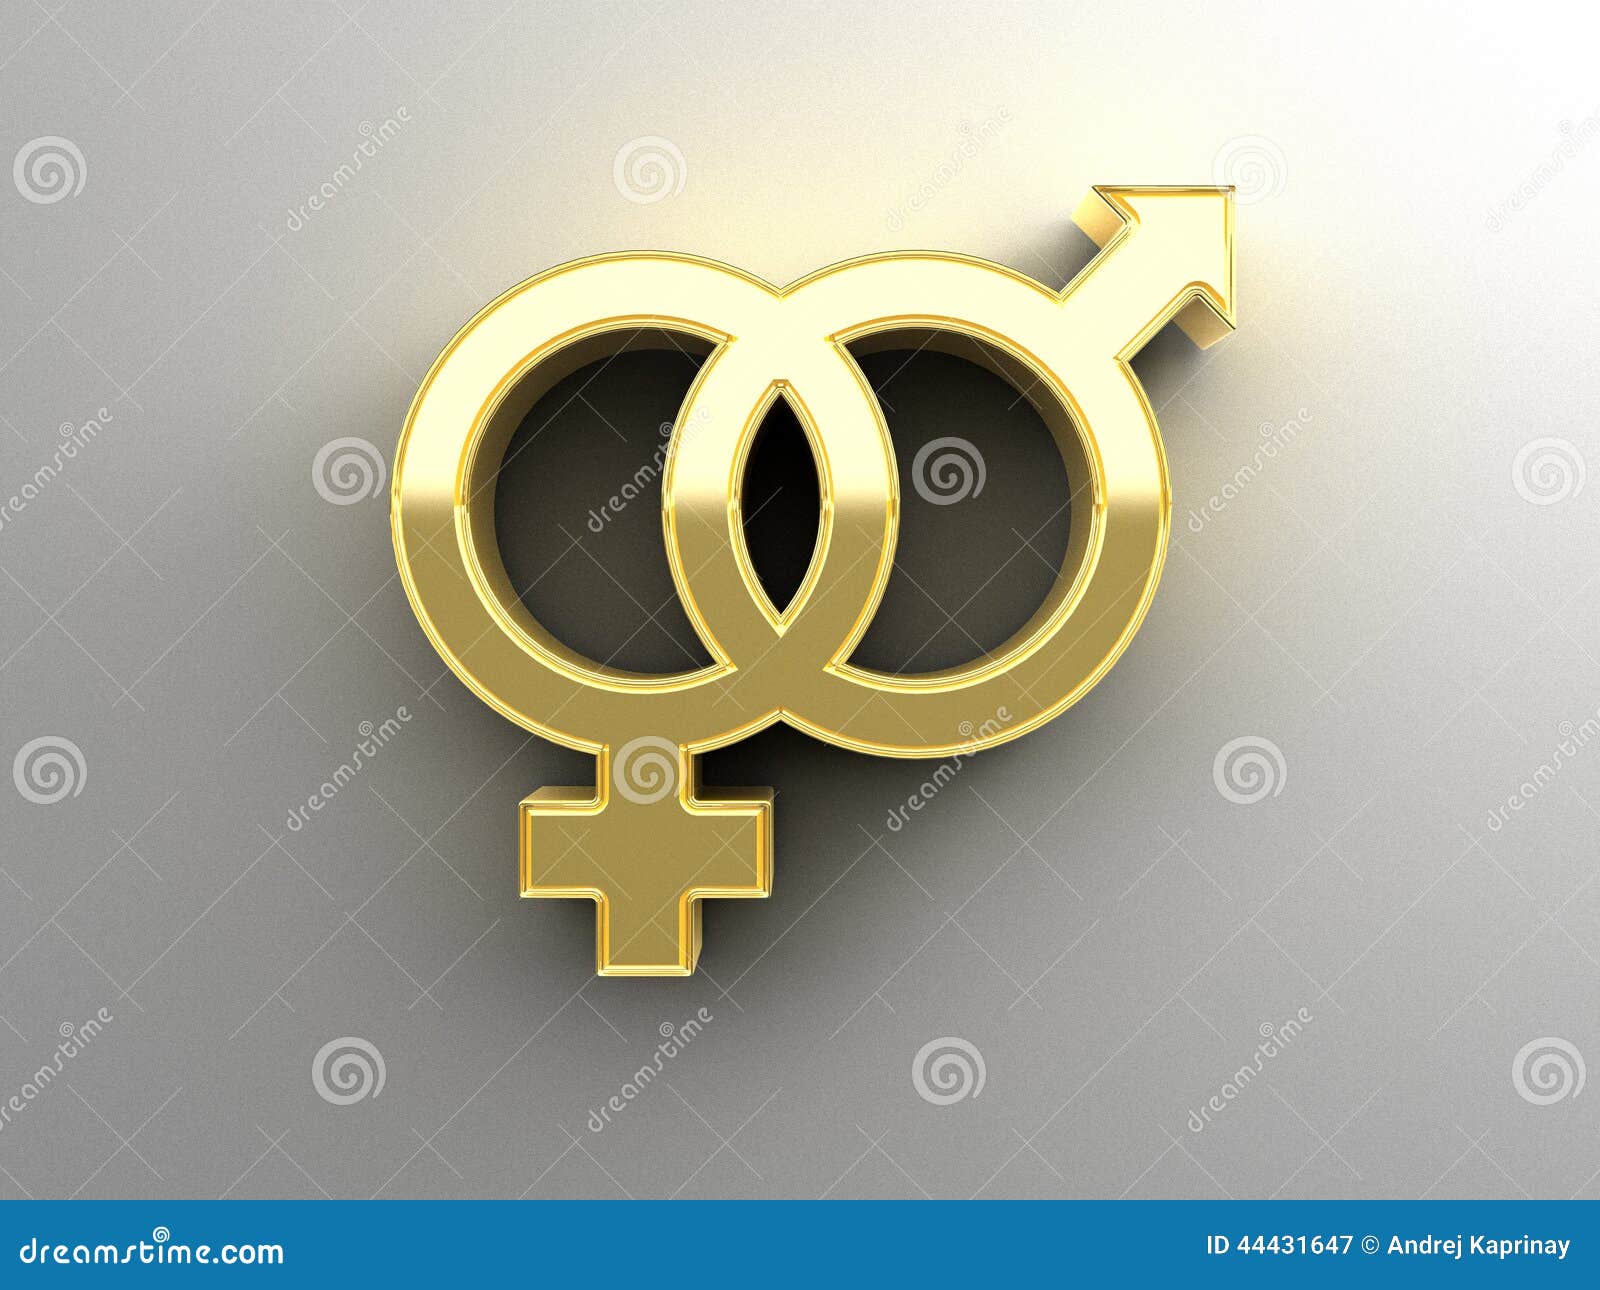 Male And Female Sex Signs Gold 3d Quality Render On The